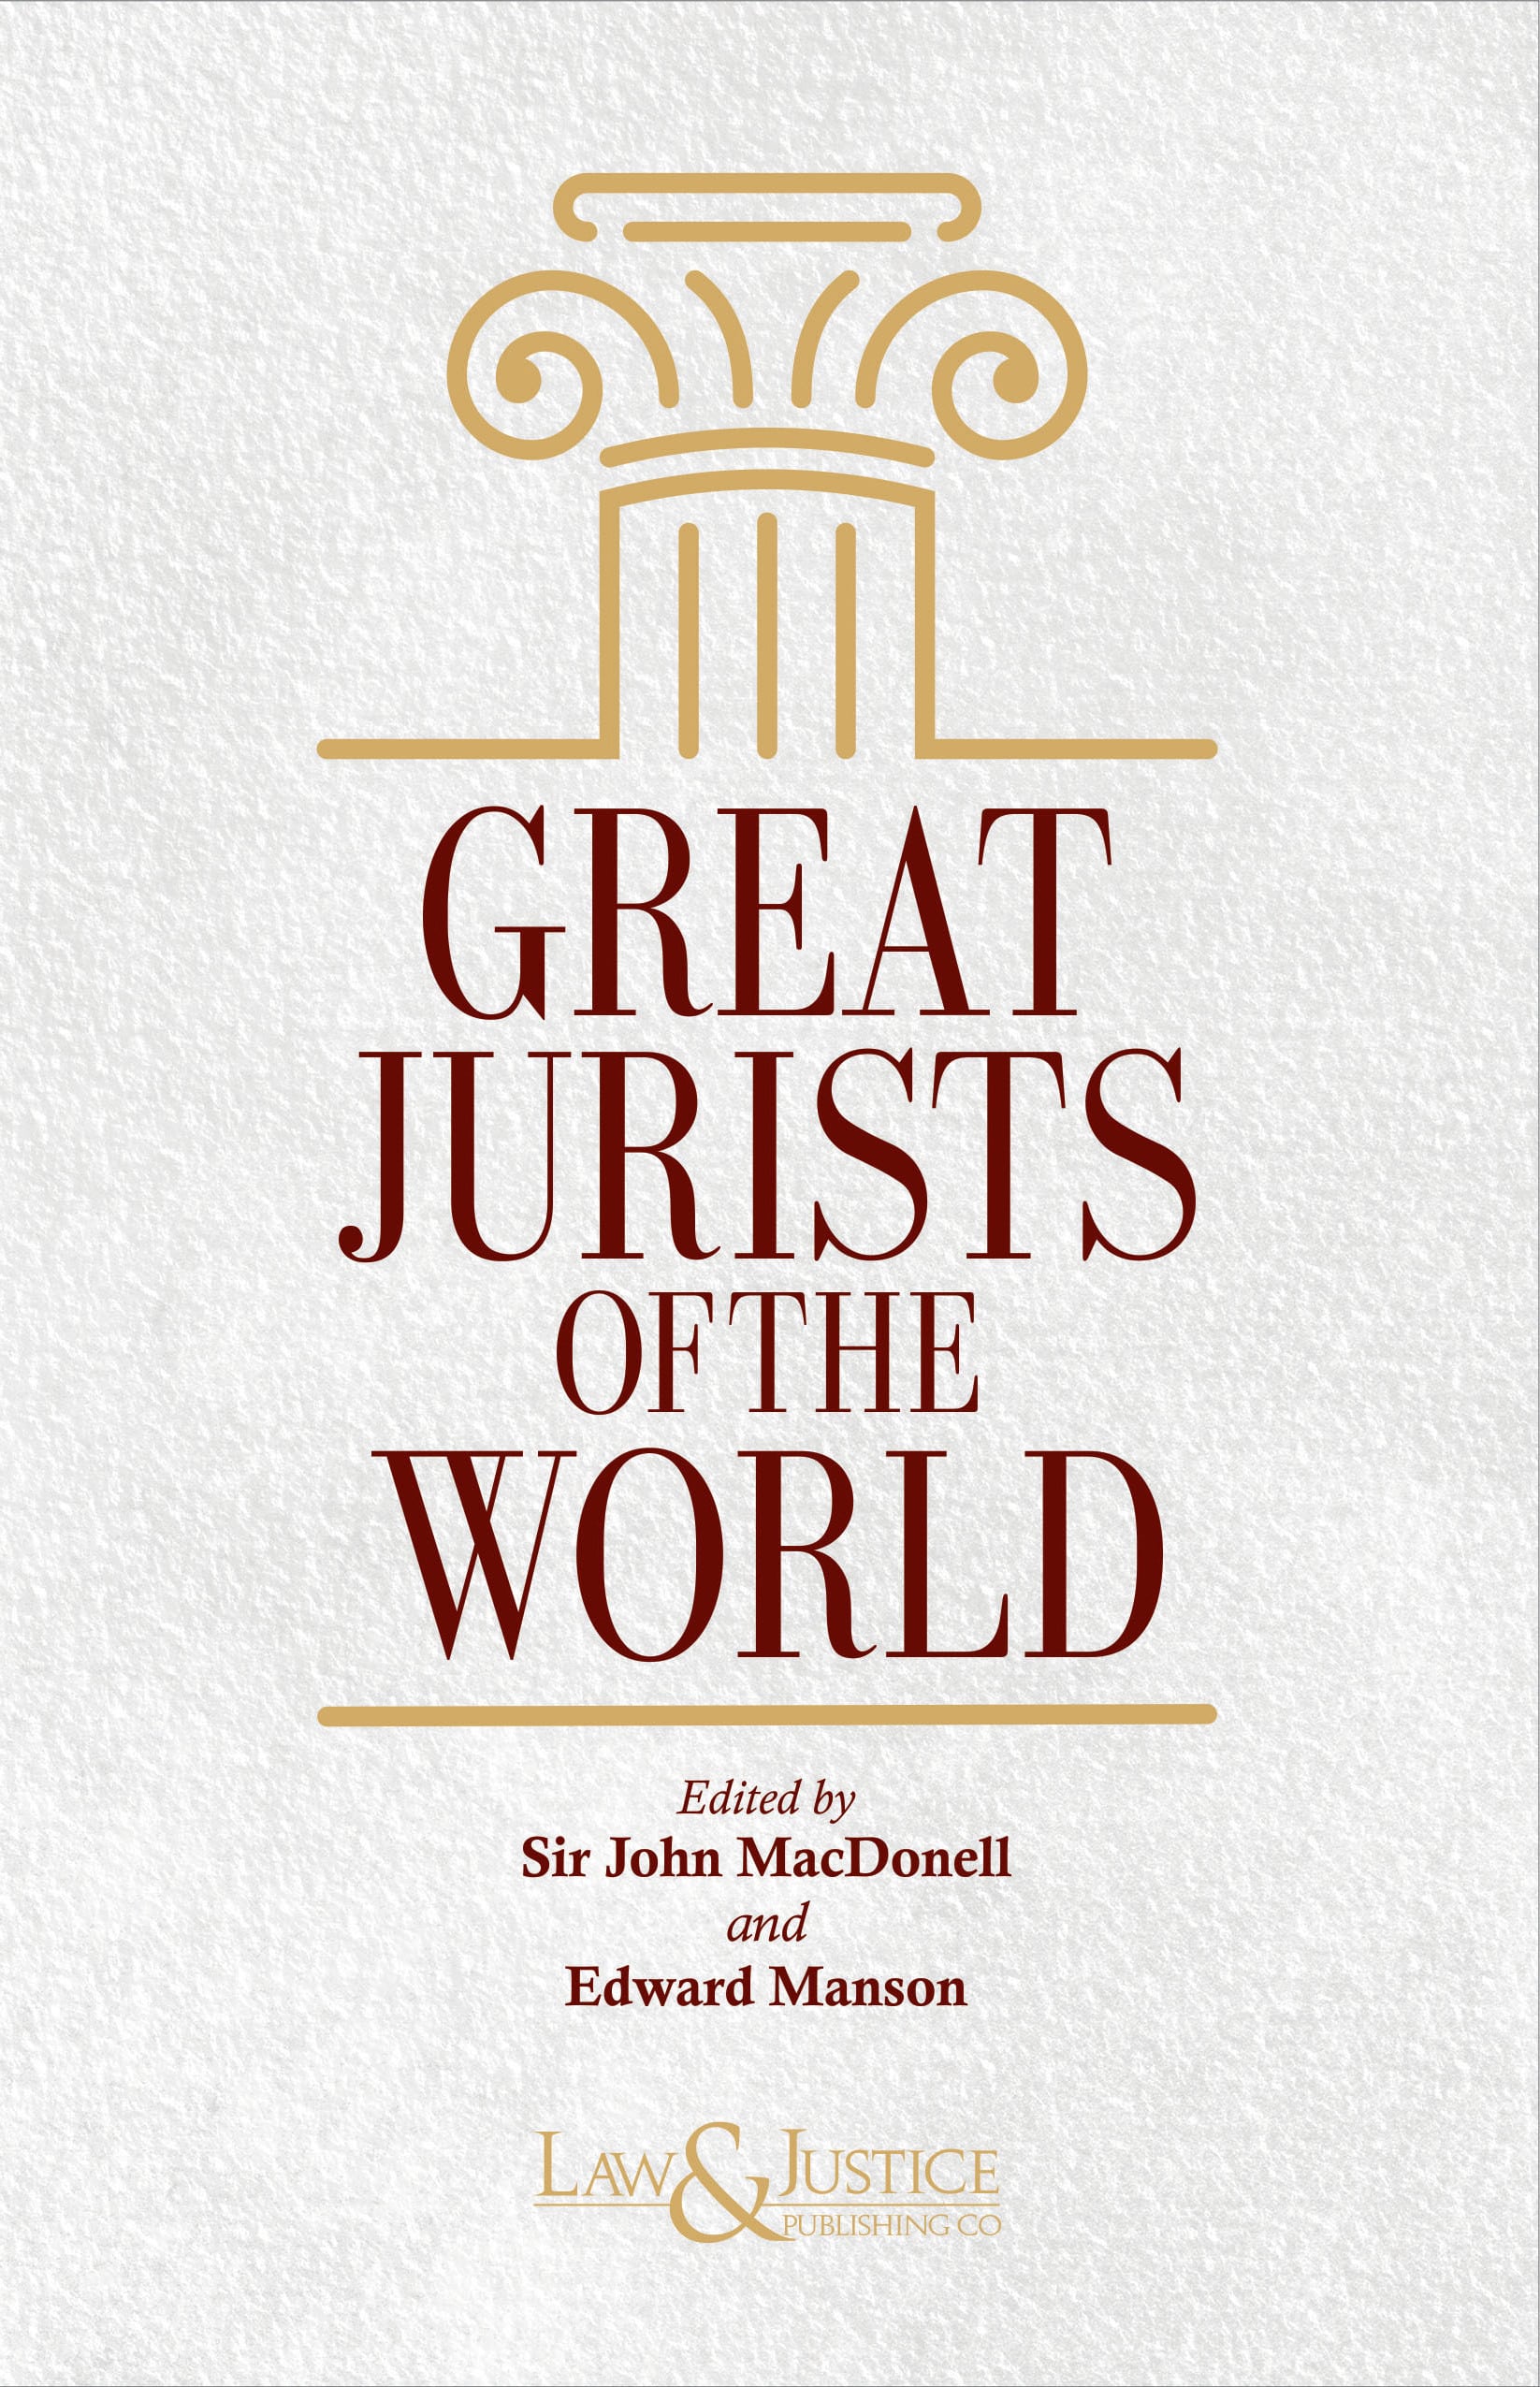 John　World　by　the　of　Jurists　Great　MacDonell